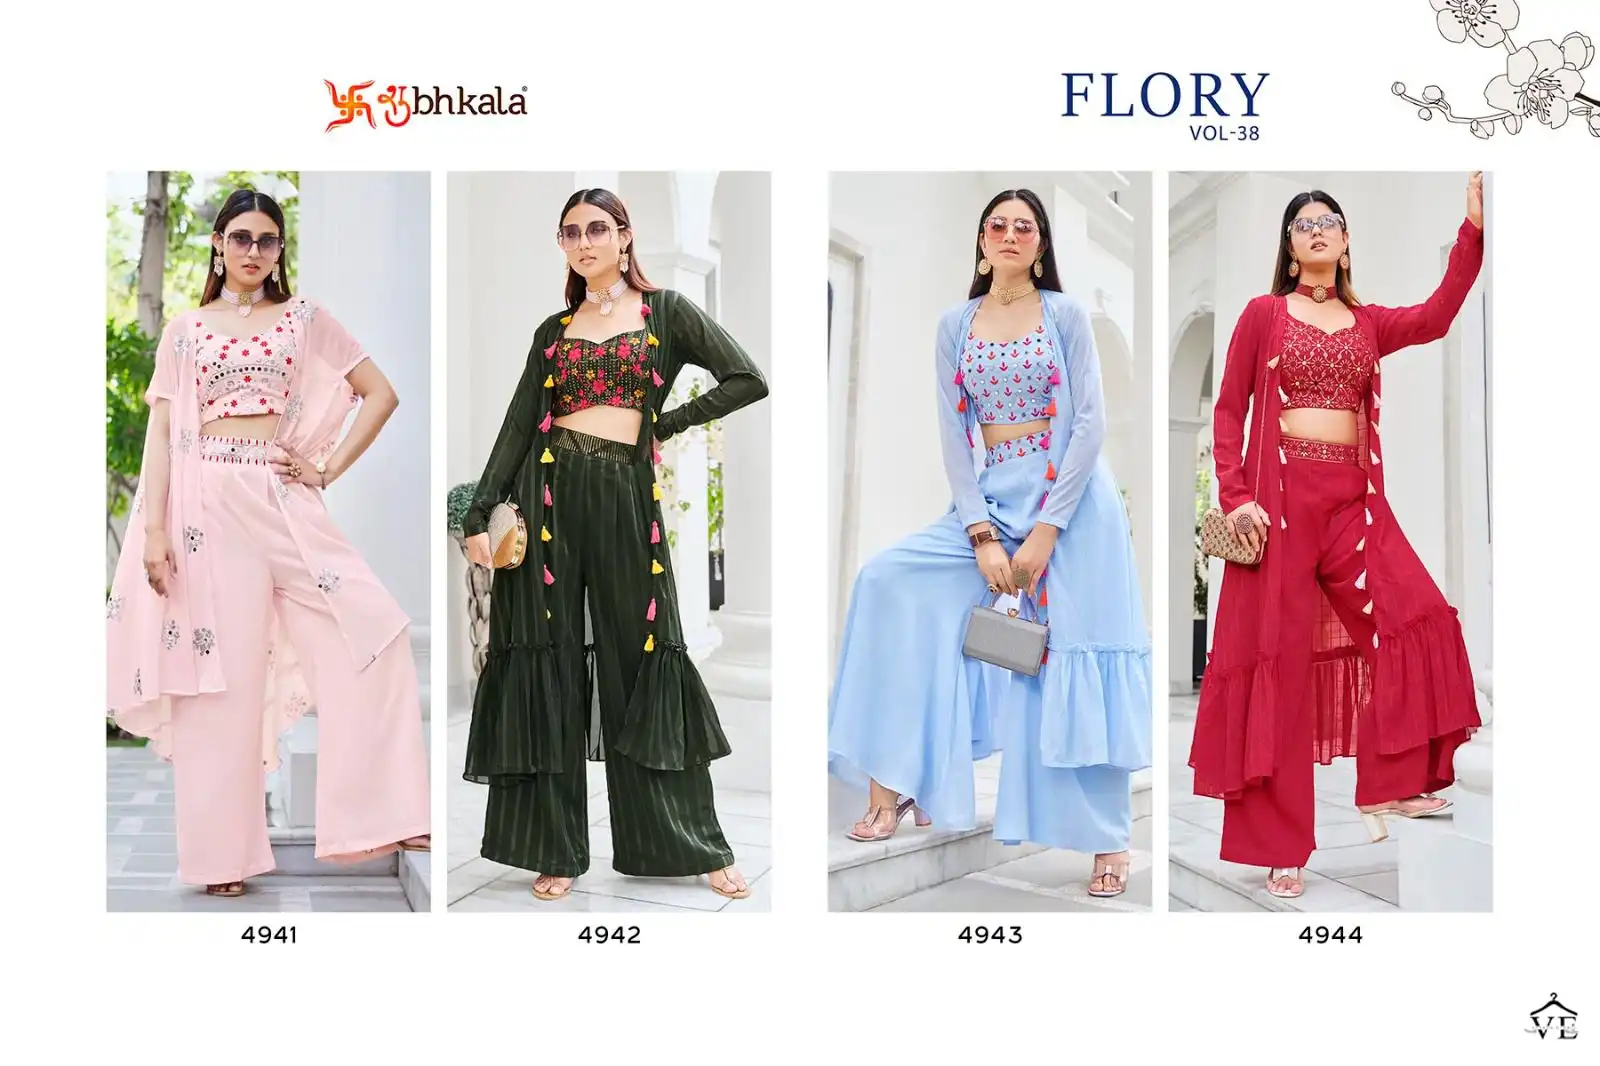 Shubhkala Flory Vol 38 Georgette Wholesale Designer Top With 